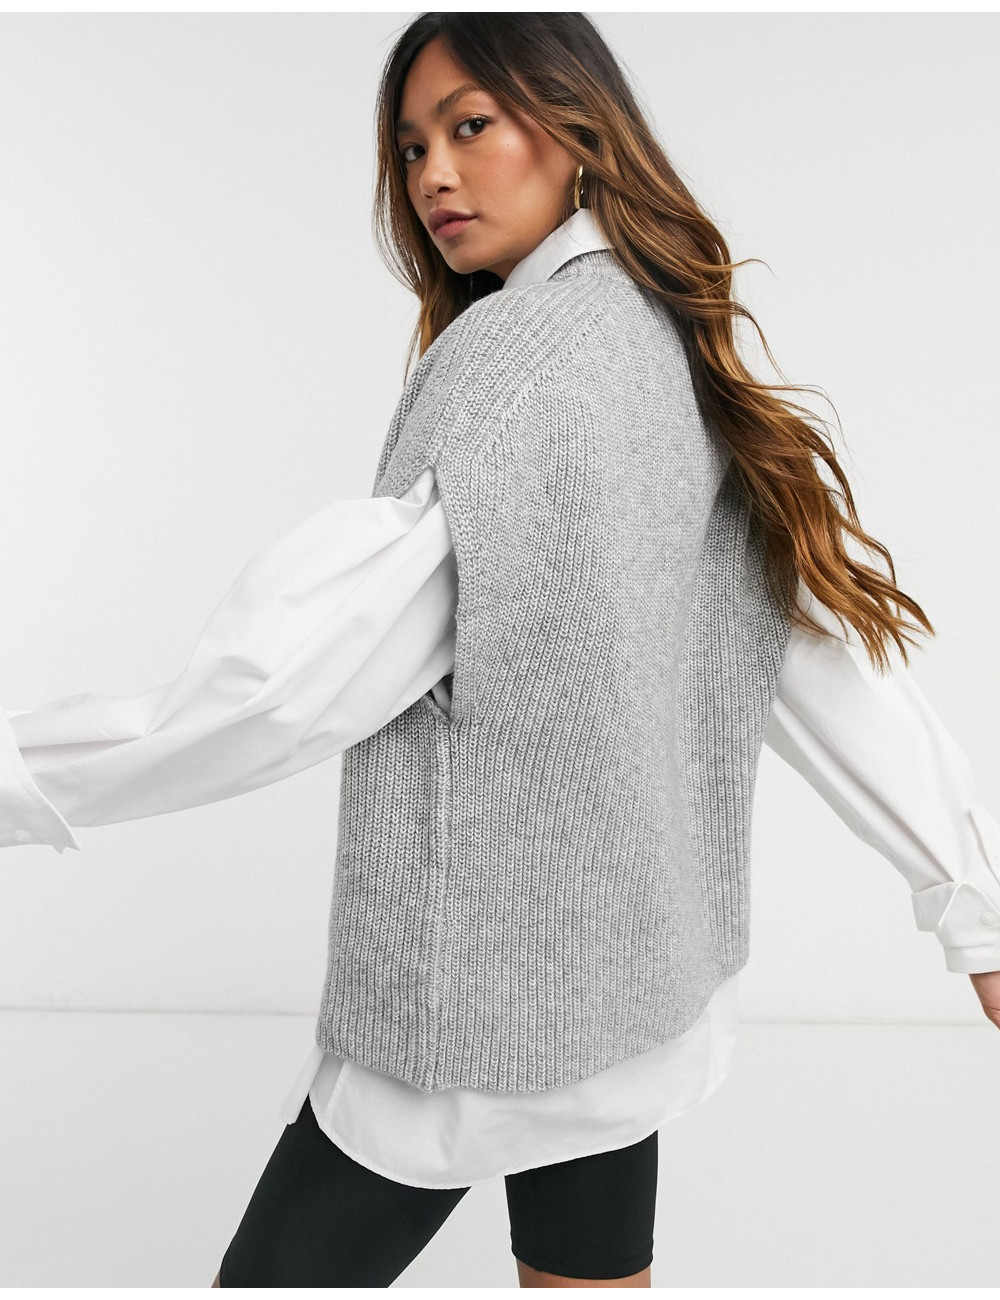 Vero Moda knitted vest with...